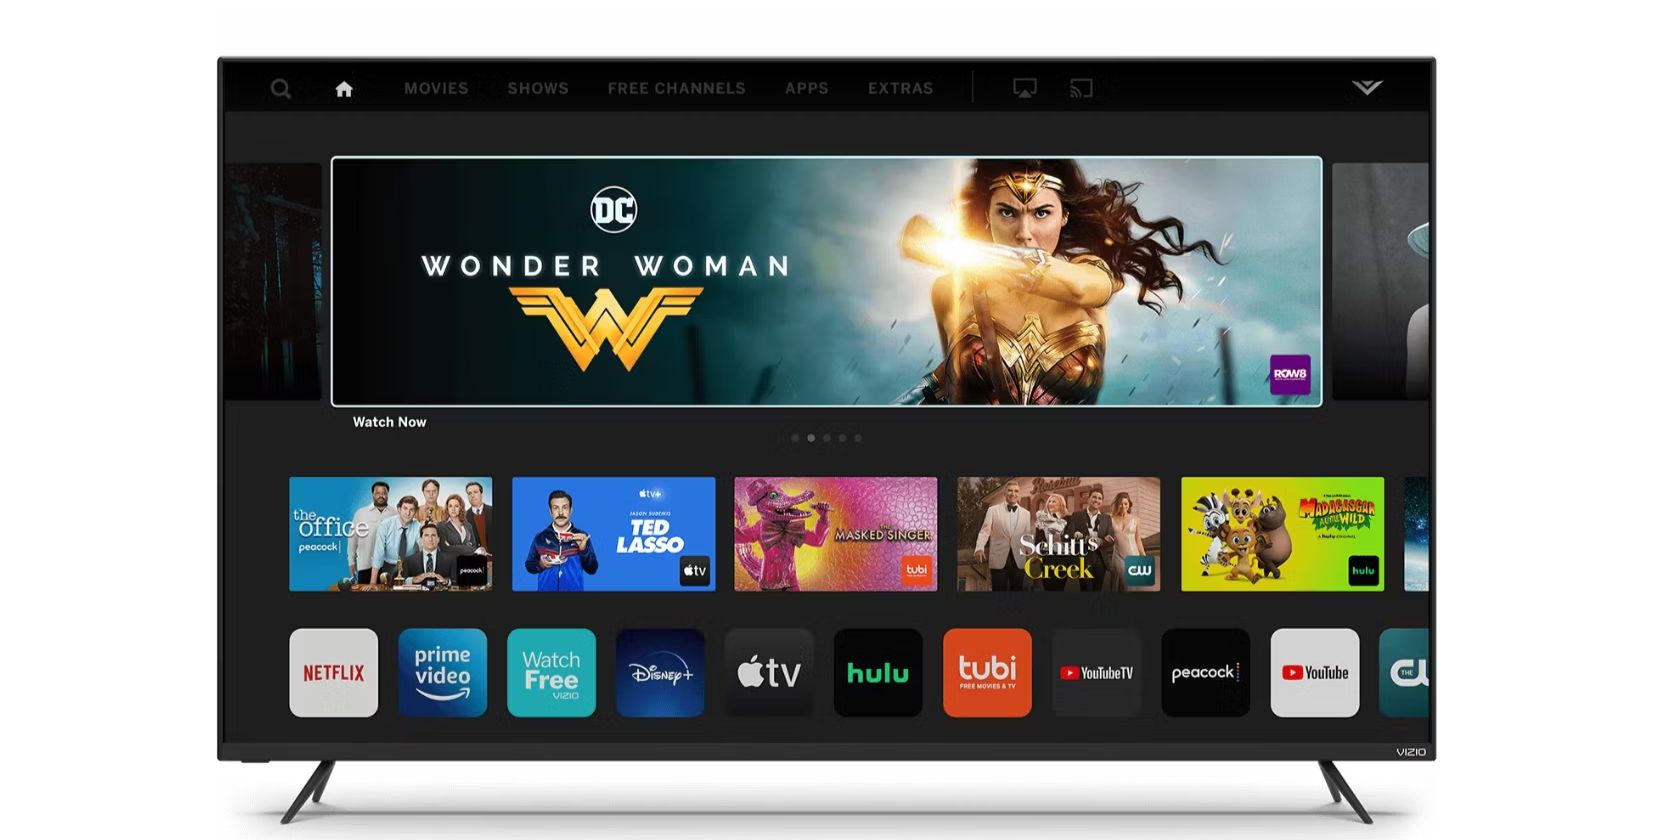 How To Download Apps On Vizio M Series Smart TV